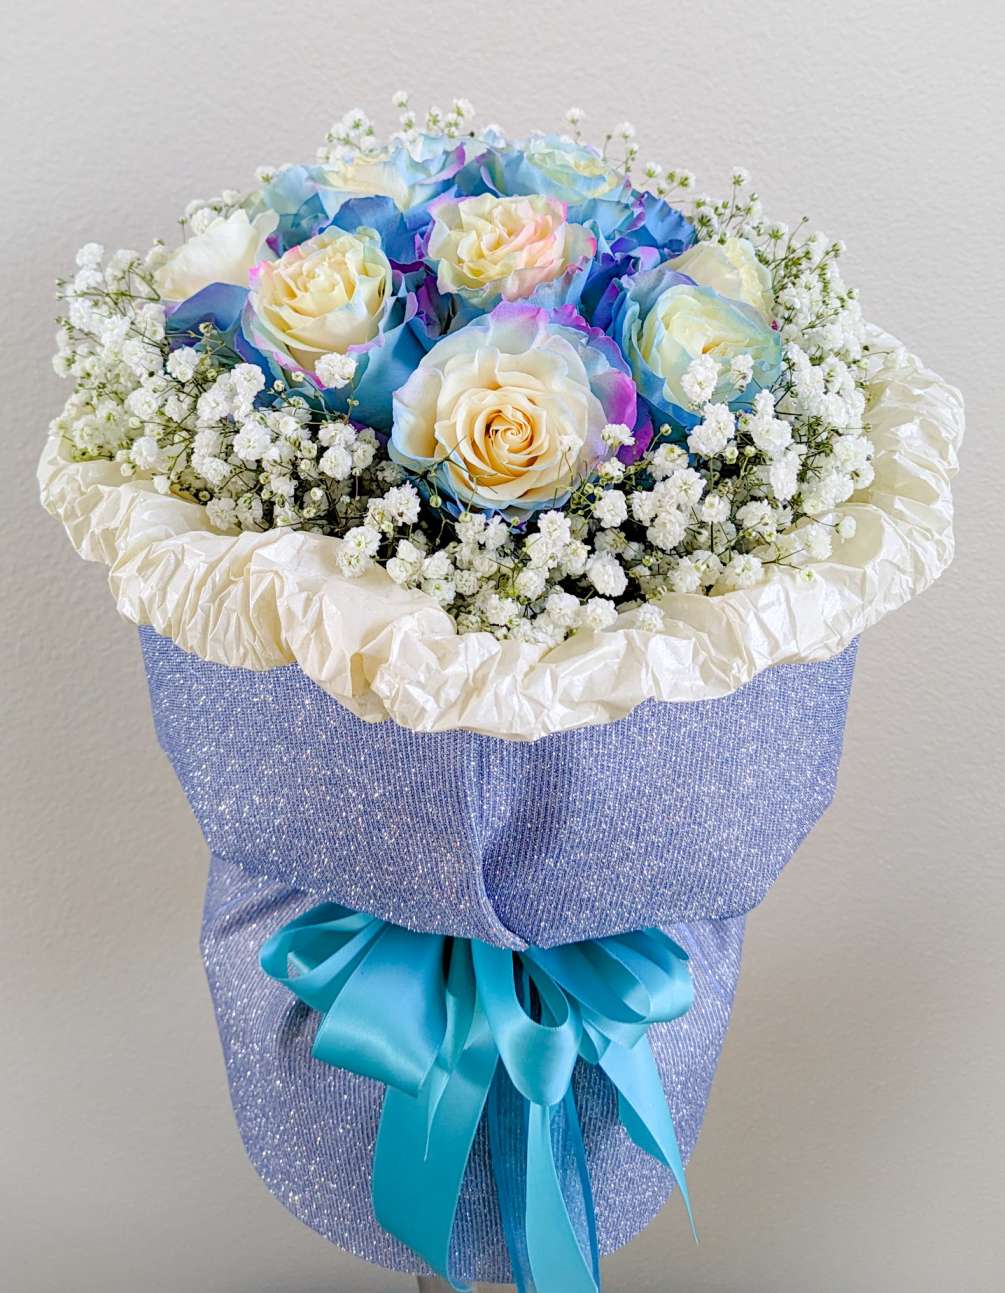 1 dz. Aurora-multi color roses surrounded by baby&#039;s breath, arranged in a